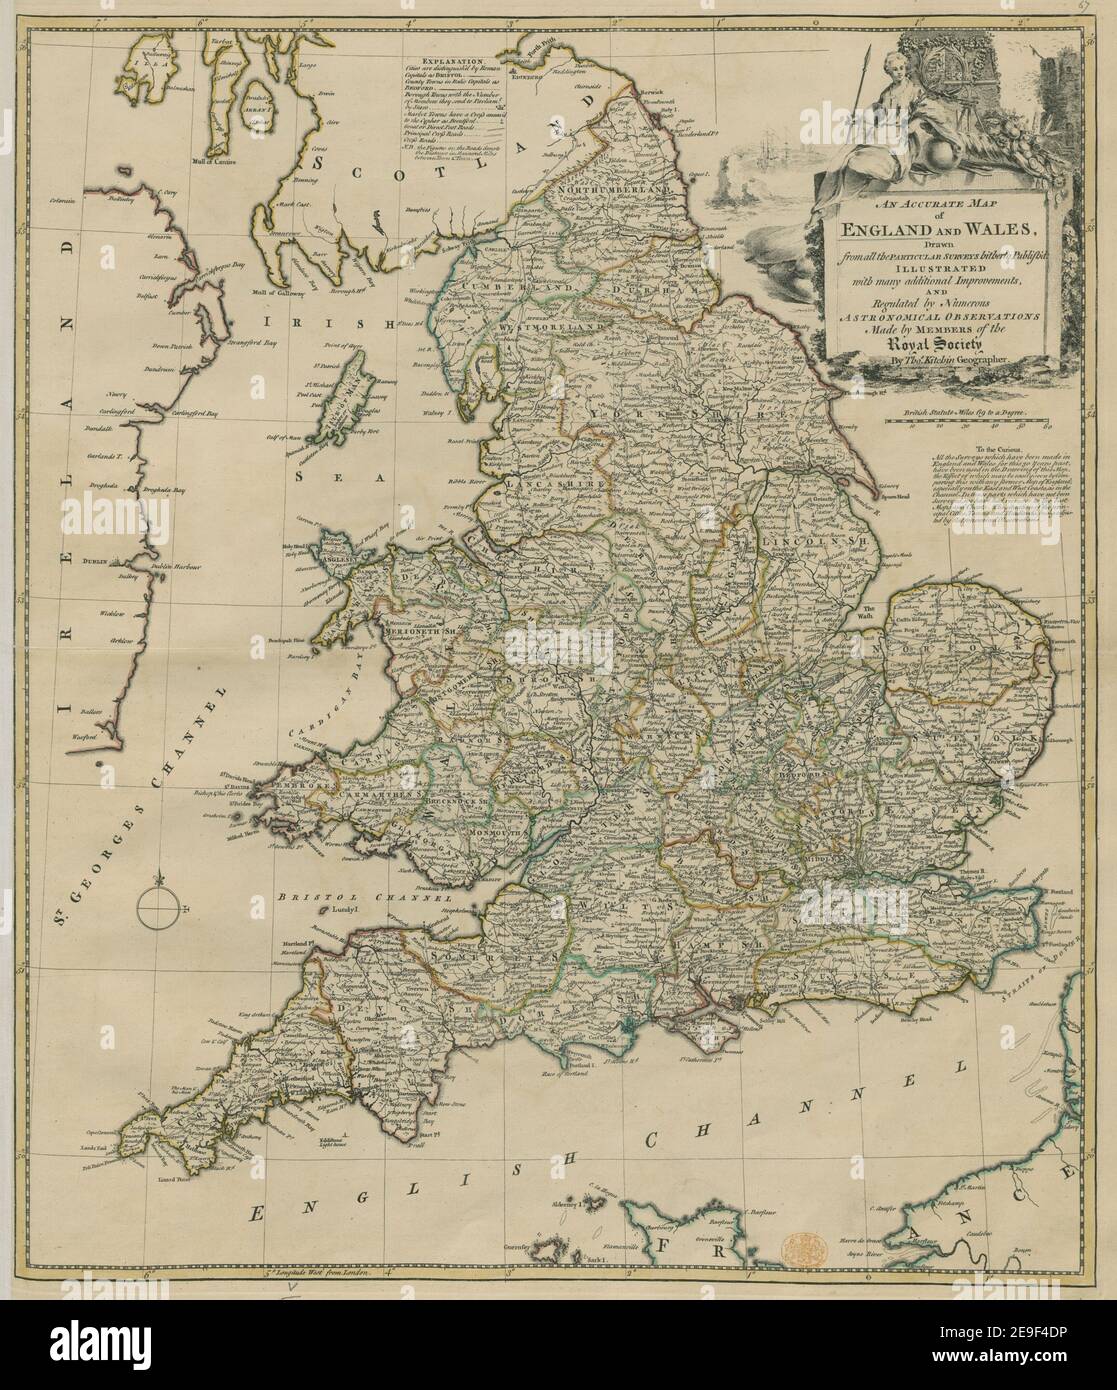 An Accurate Map of England and Wales  Author  Kitchin, Thomas 5.67. Place of publication: [London] Publisher: [T. Kitchin]., Date of publication: [1769 c.].  Item type: 1 map Medium: copperplate engraving Dimensions: 57.6 x 49.3 cm  Former owner: George III, King of Great Britain, 1738-1820 Stock Photo